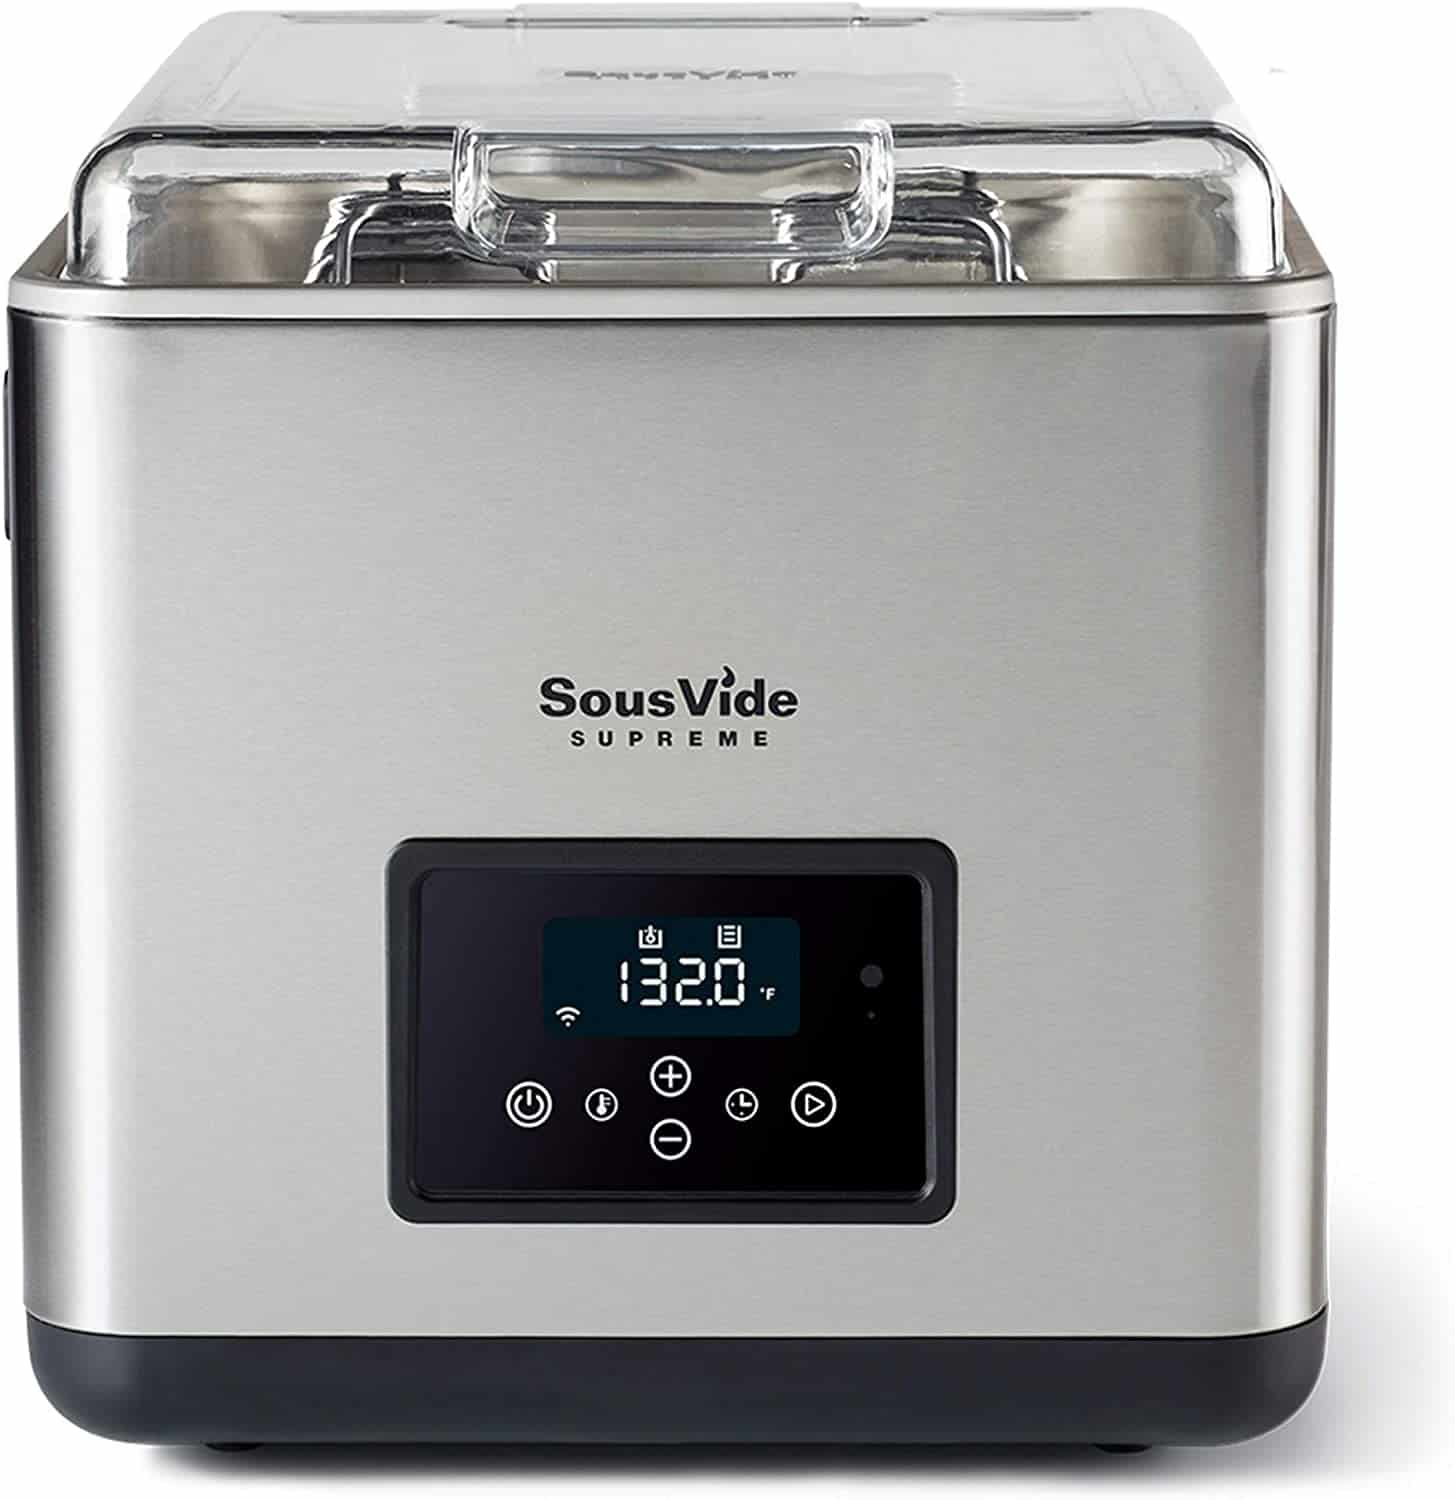 Counter top sous vide oven.